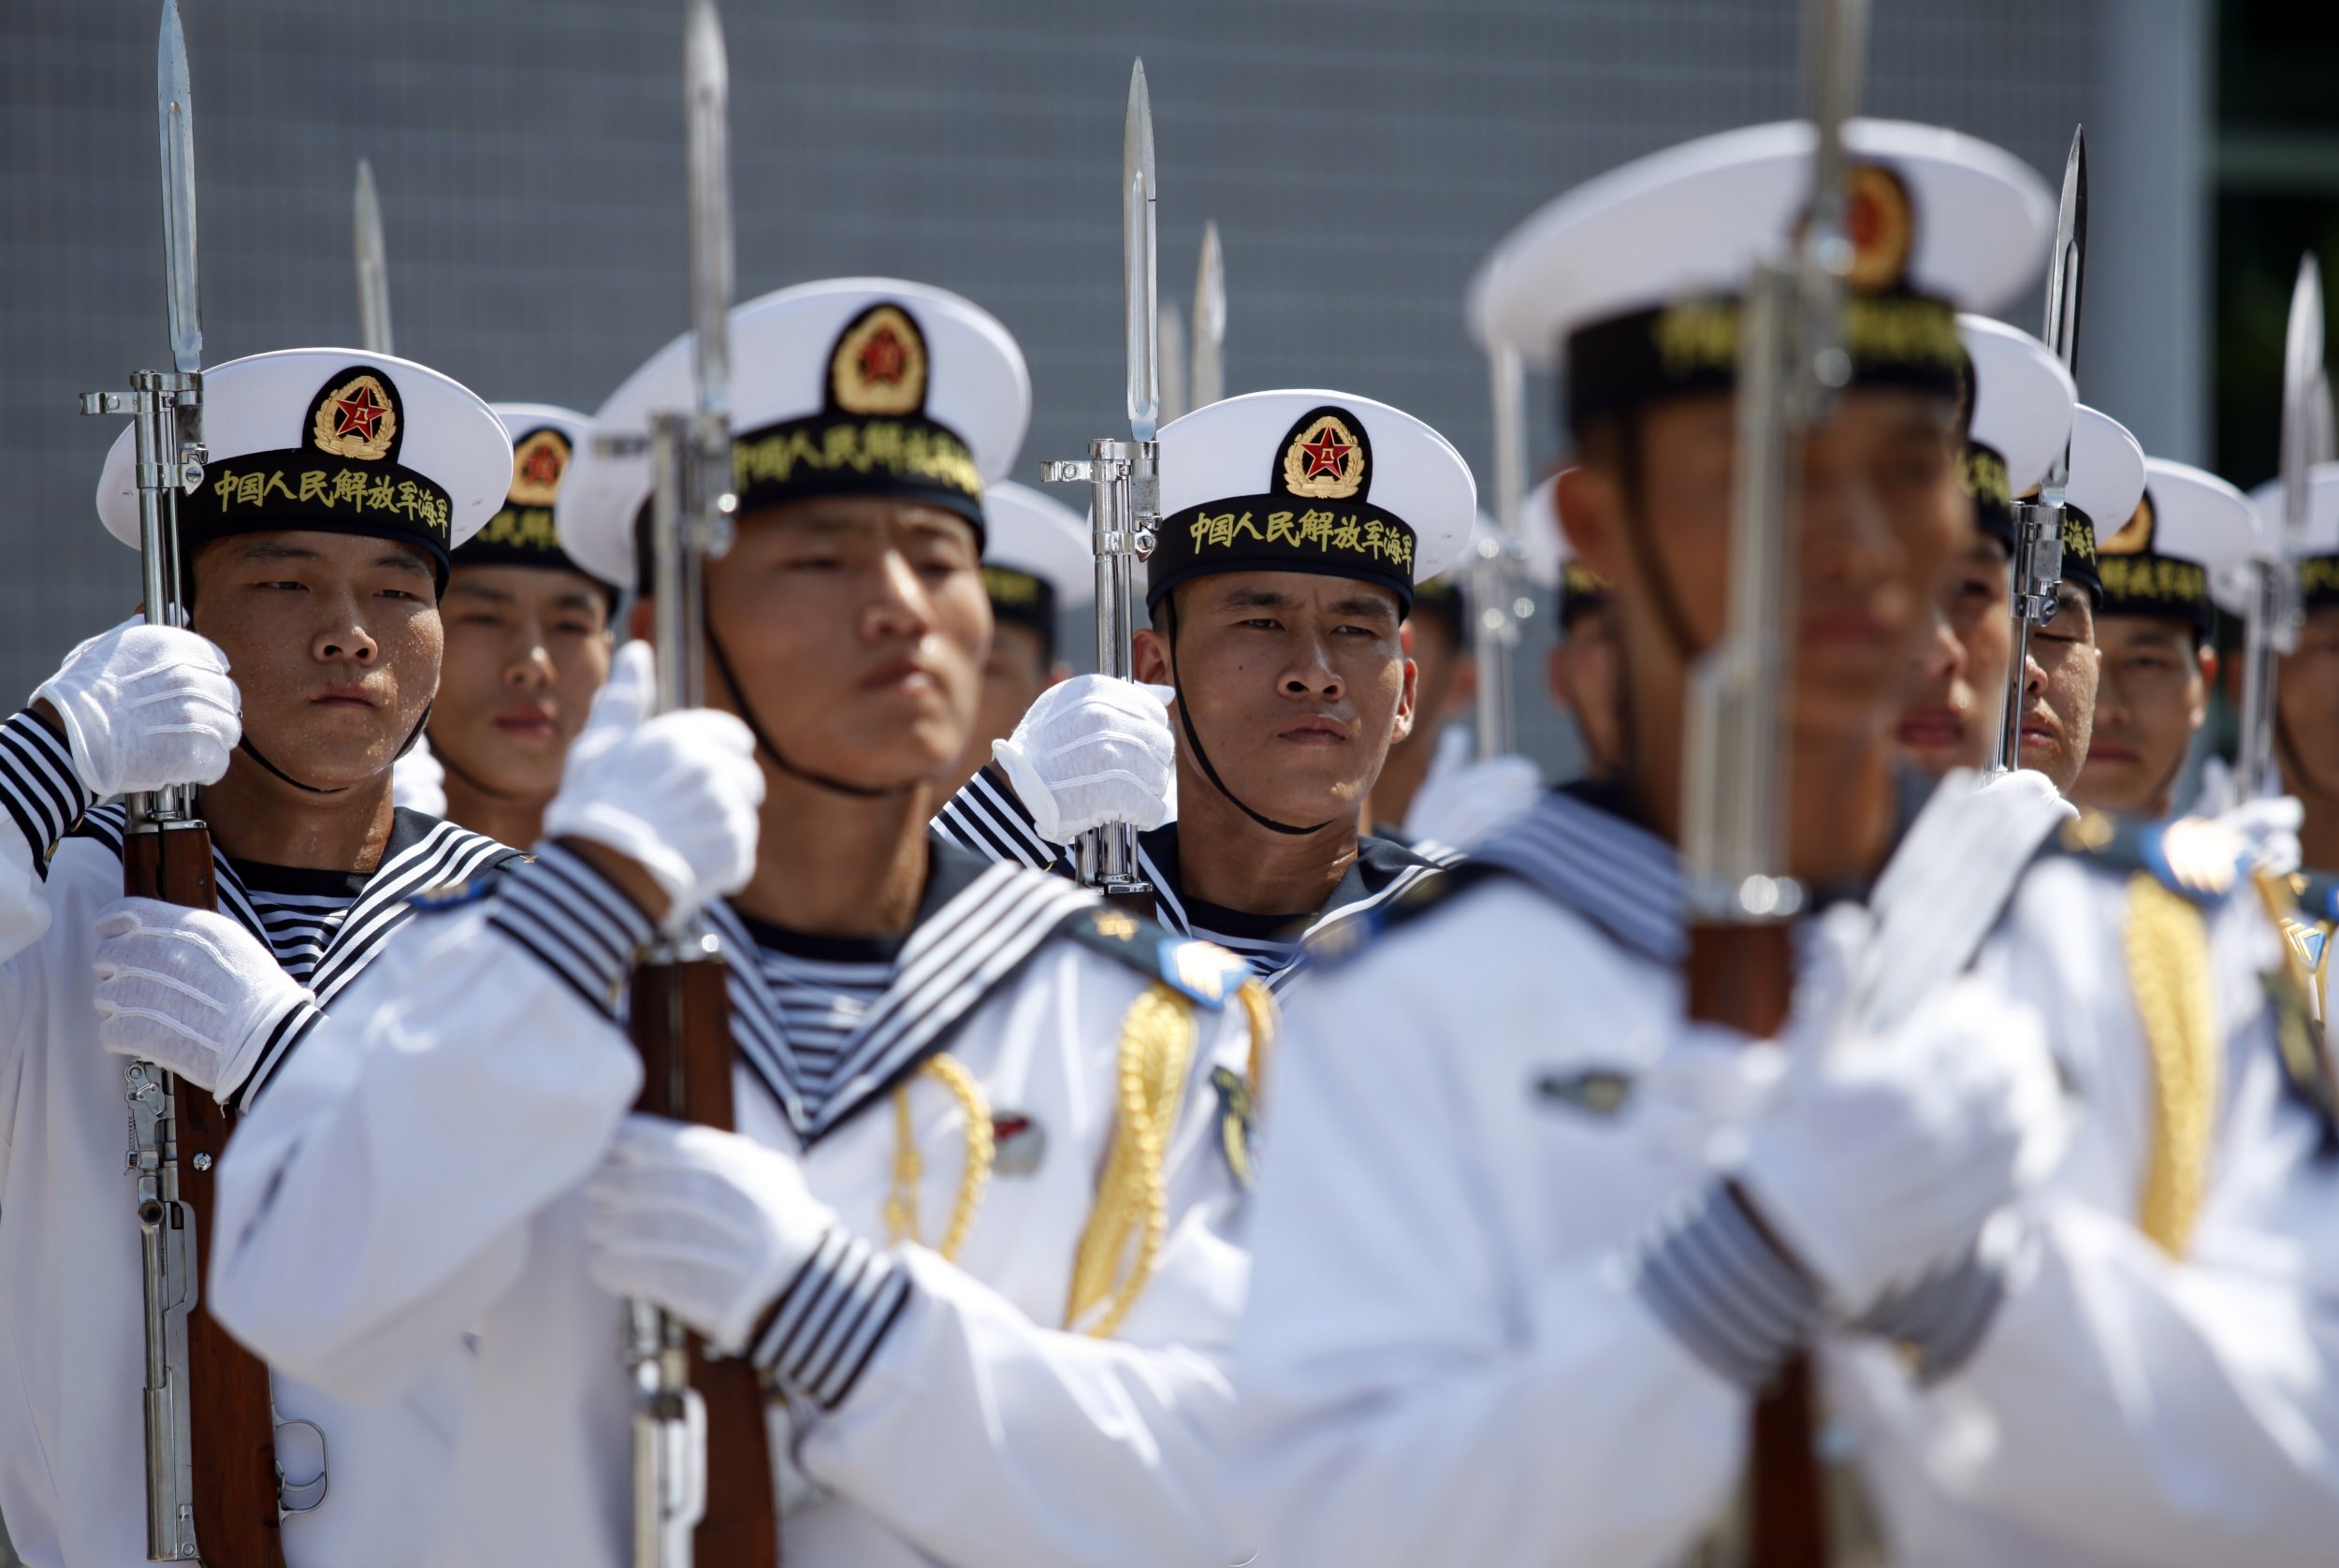 China's Peoples' Liberation Army Navy sailors march